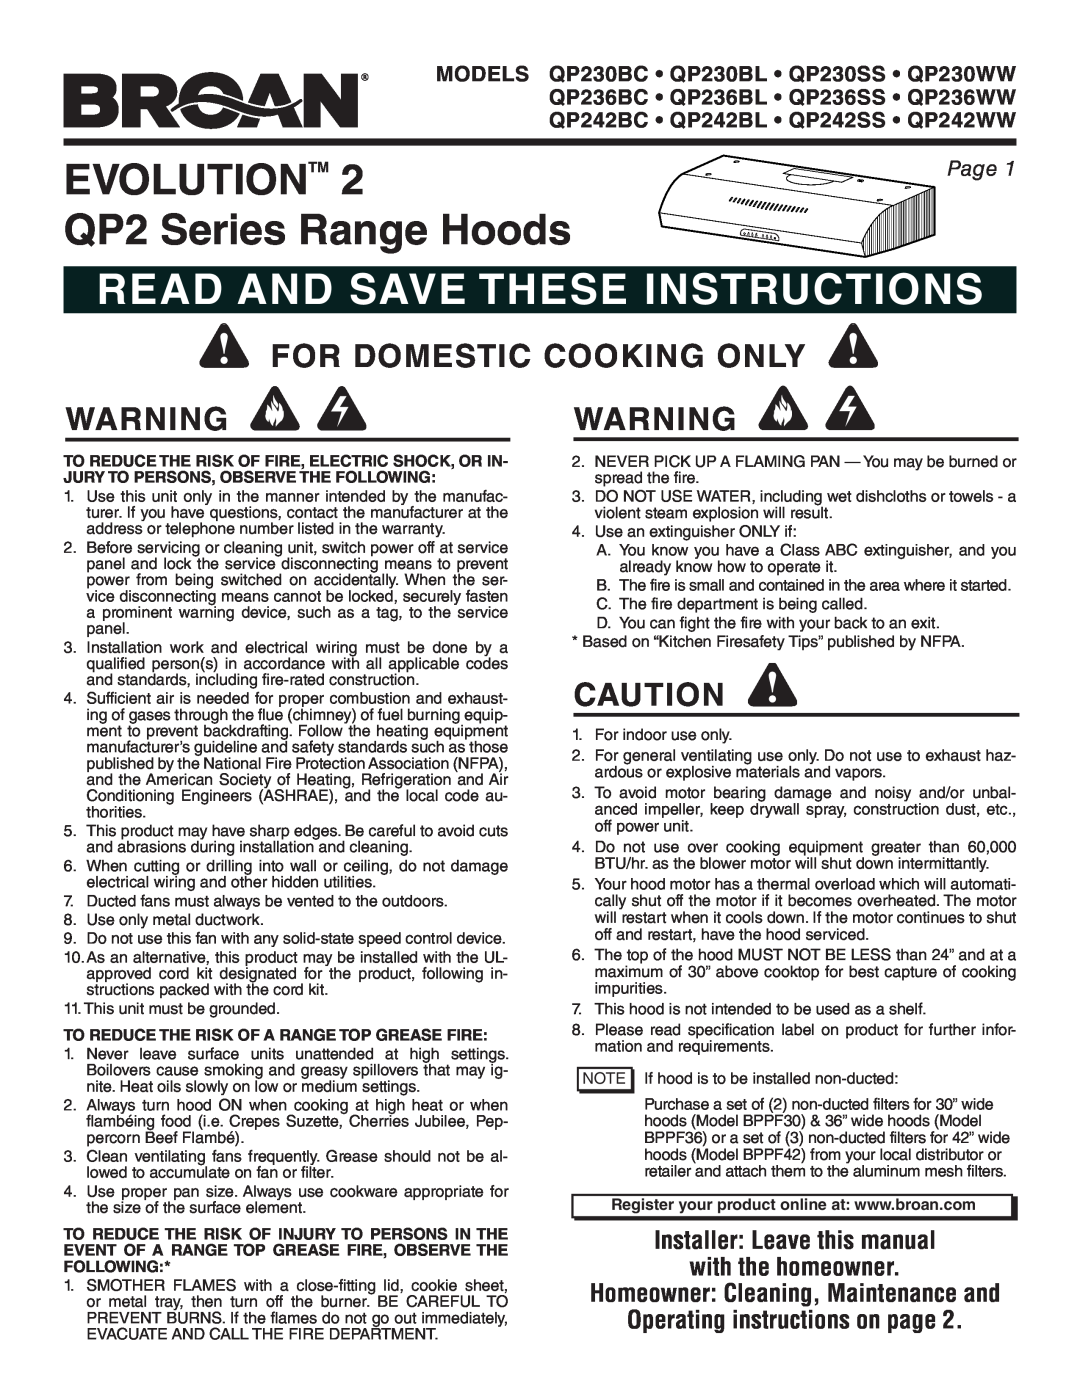 Broan QP242BL manual Evolution, QP2 Series Range Hoods, Read And Save These Instructions, For Domestic Cooking Only, Page 